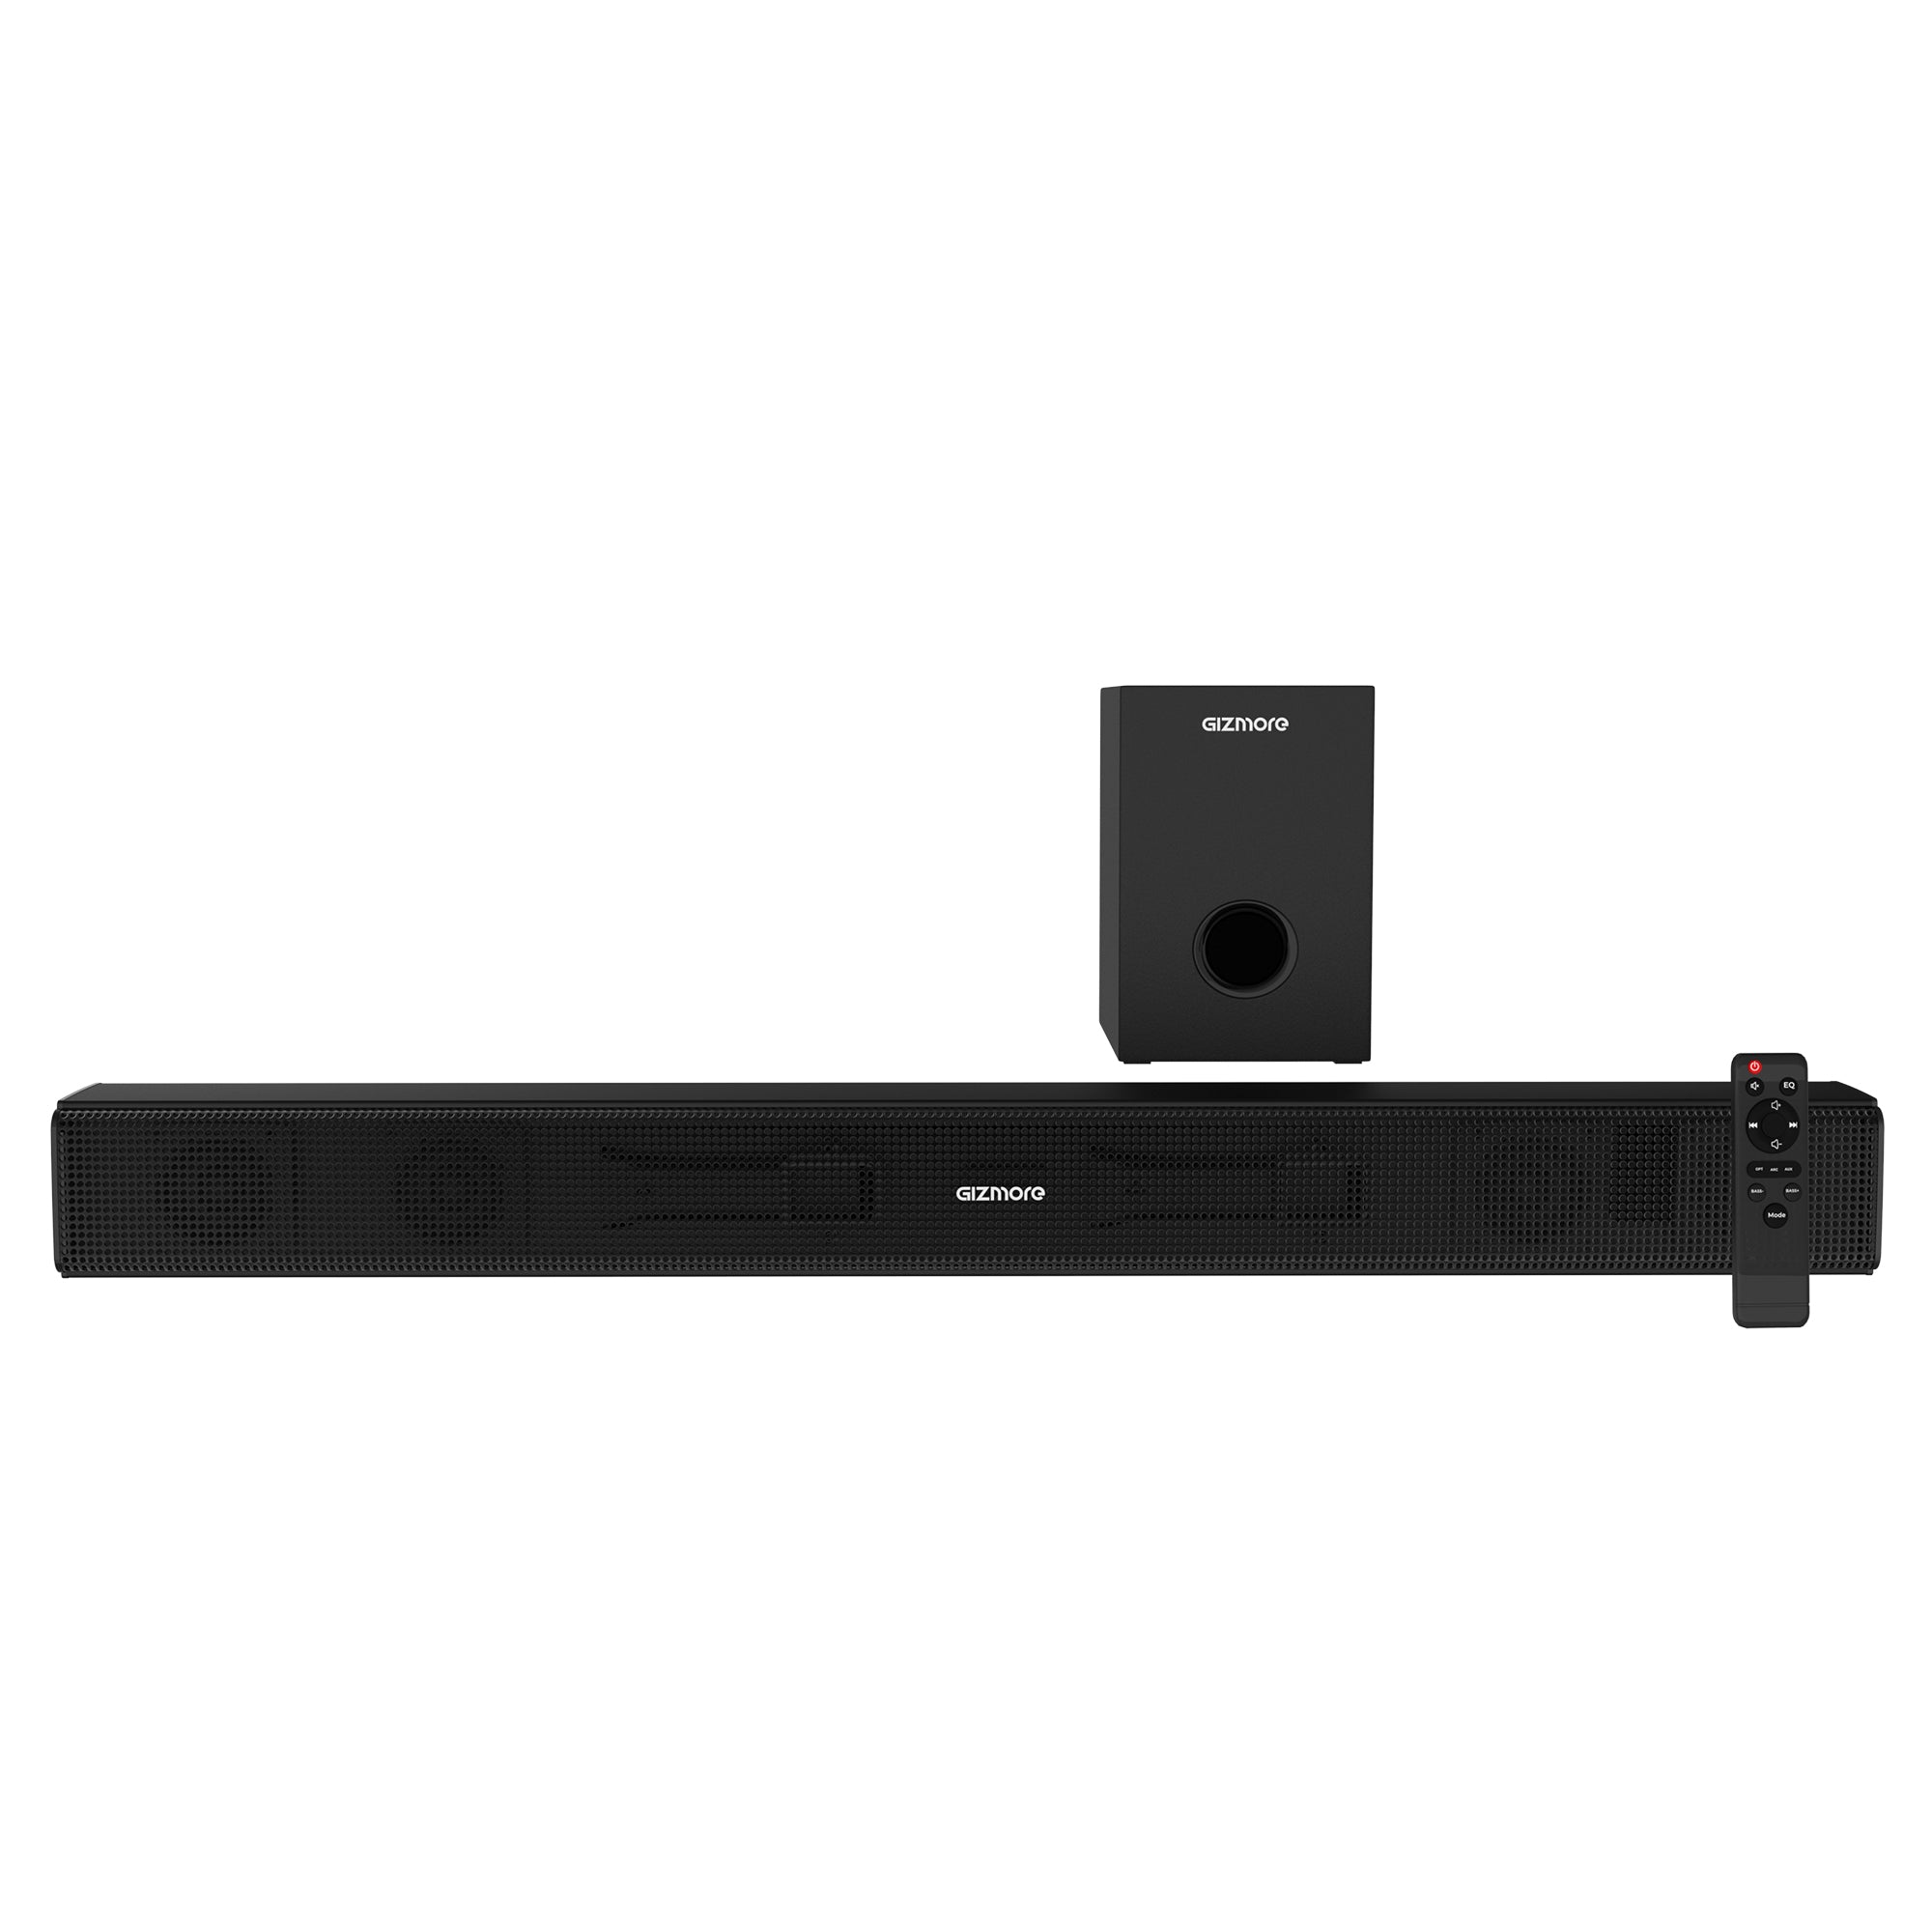 GIZMORE BAR6000 60W RMS Wired Soundbar with 360 Degree Surround Sound & Extra Deep Bass Subwoofer| Wall Mounted | Multi Connectivity & Remote Control connect with Mobile TV/PC and Projector